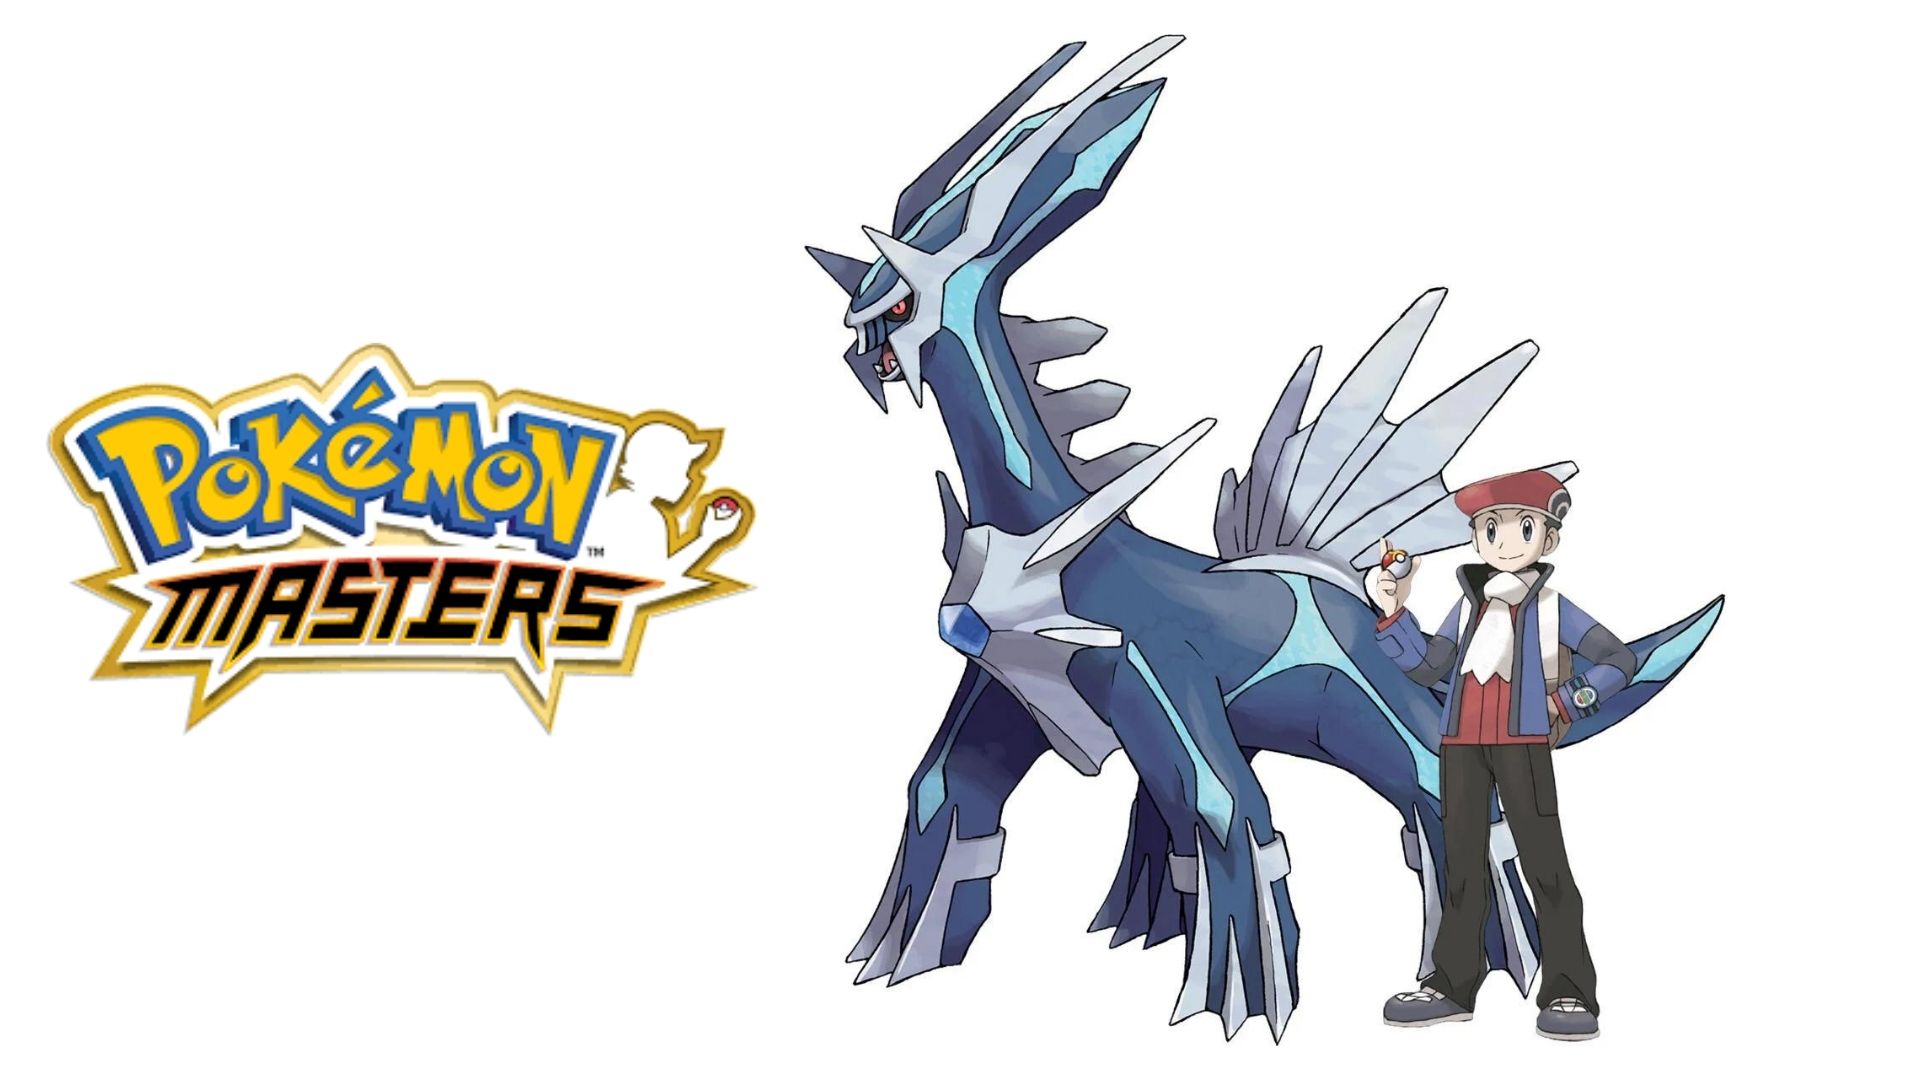 Lucas and Dialga Make Their Appearance in Pokémon Masters EX